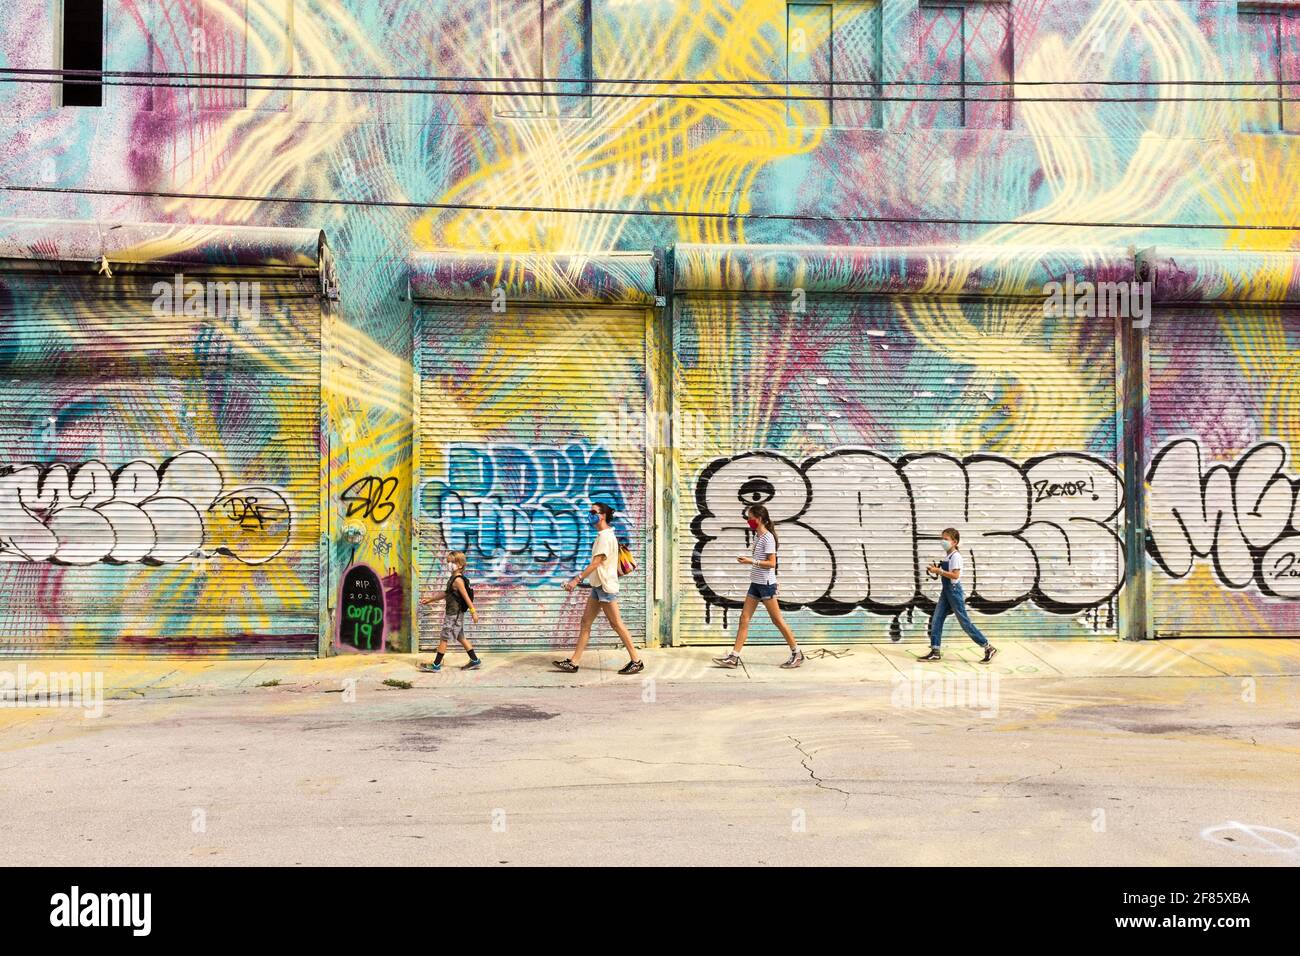 A sightseeing family walks down a street with colorful street art covering every wall in sight in the Wynwood Art District, Miami, FLorida, USA Stock Photo